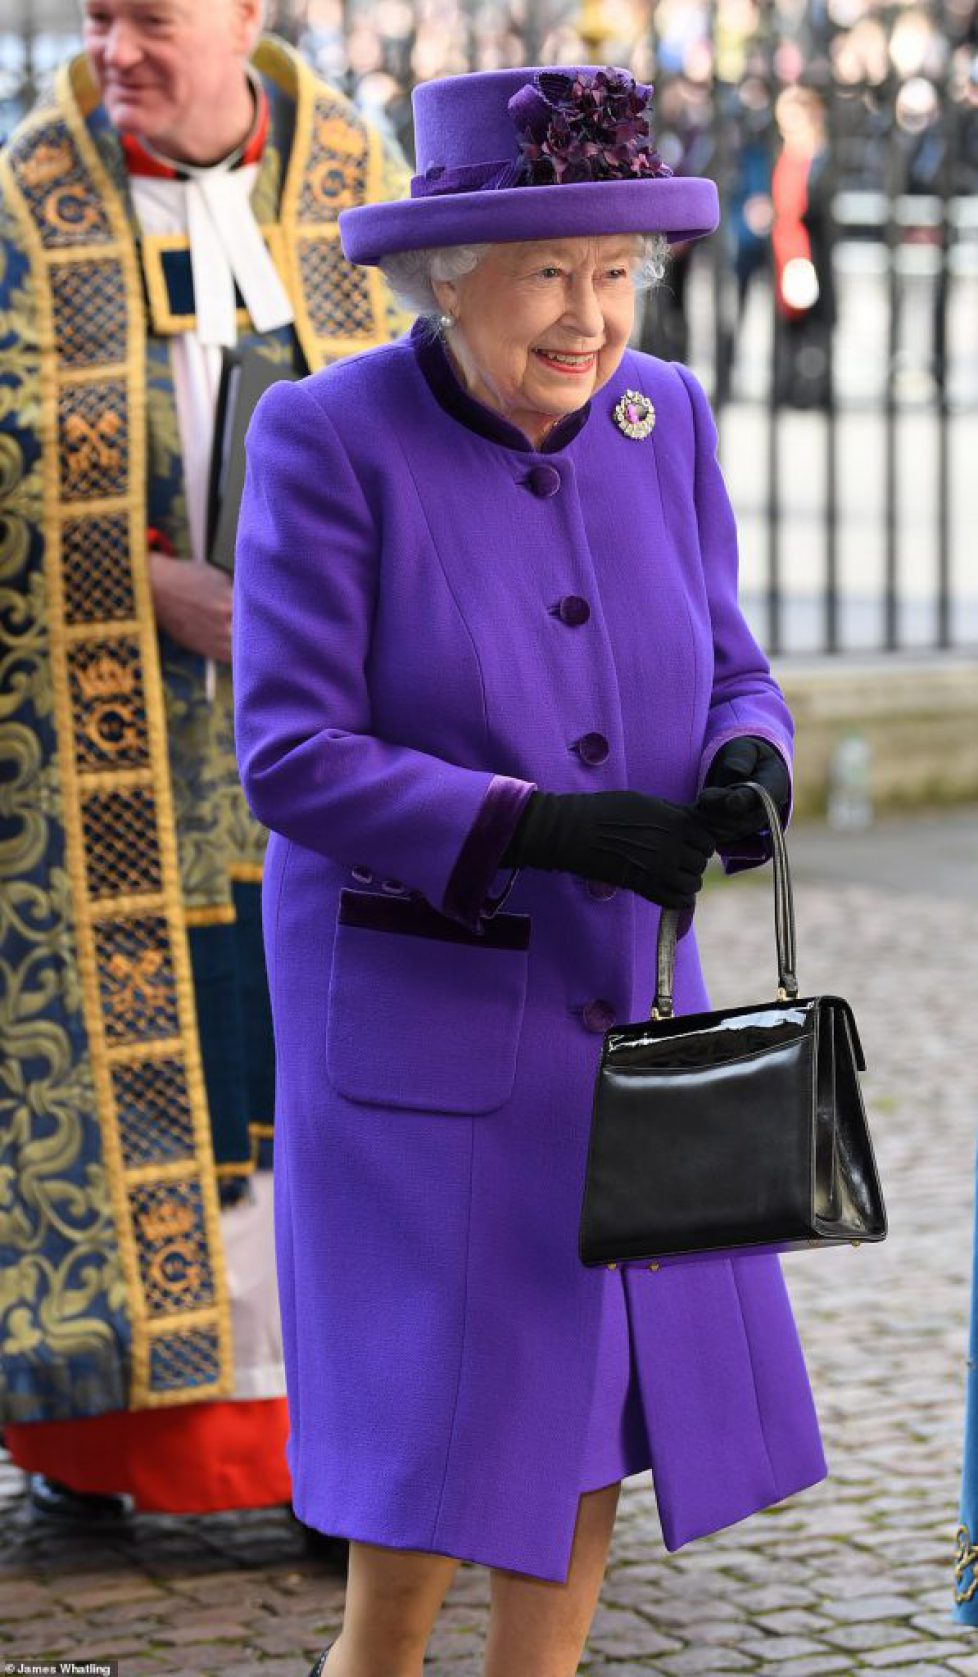 10840522-6795345-The_Queen_opted_for_a_bold_purple_ensemble_as_she_donned_a_match-m-83_1552317775188